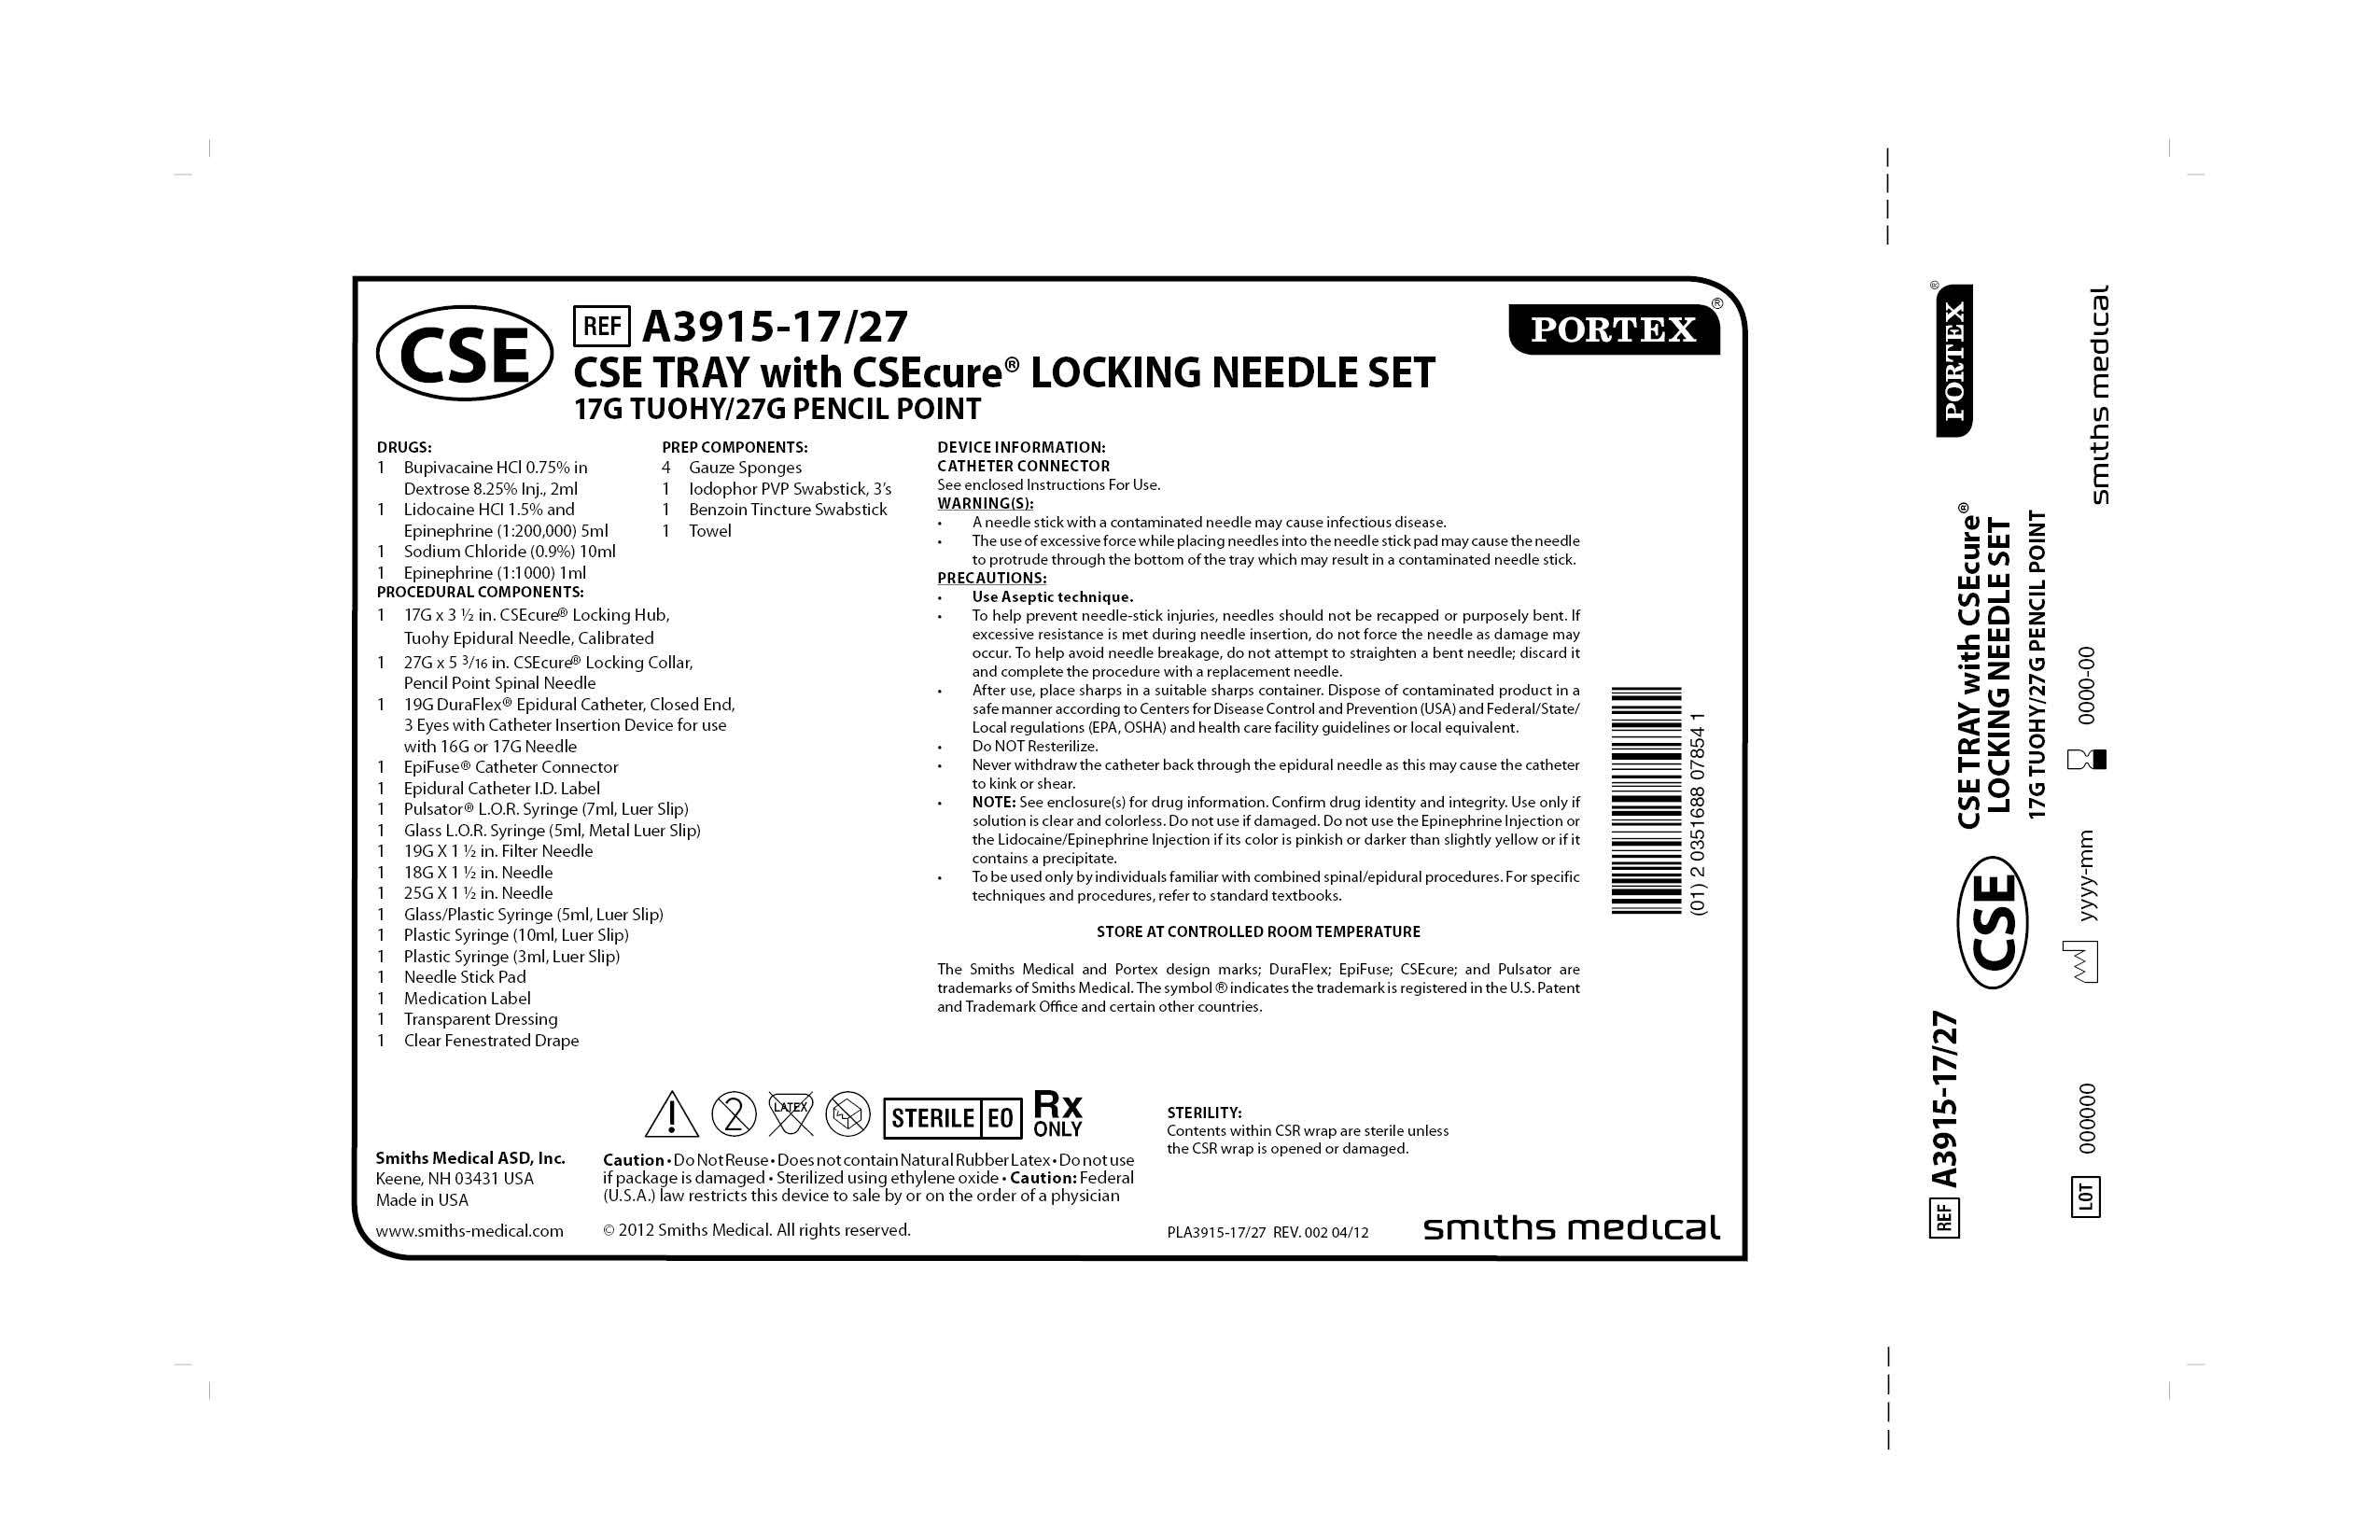 A3915-17/27 CSE TRAY with CSEcure LOCKING NEEDLE SET 17G TUOHY/27G PENCIL POINT